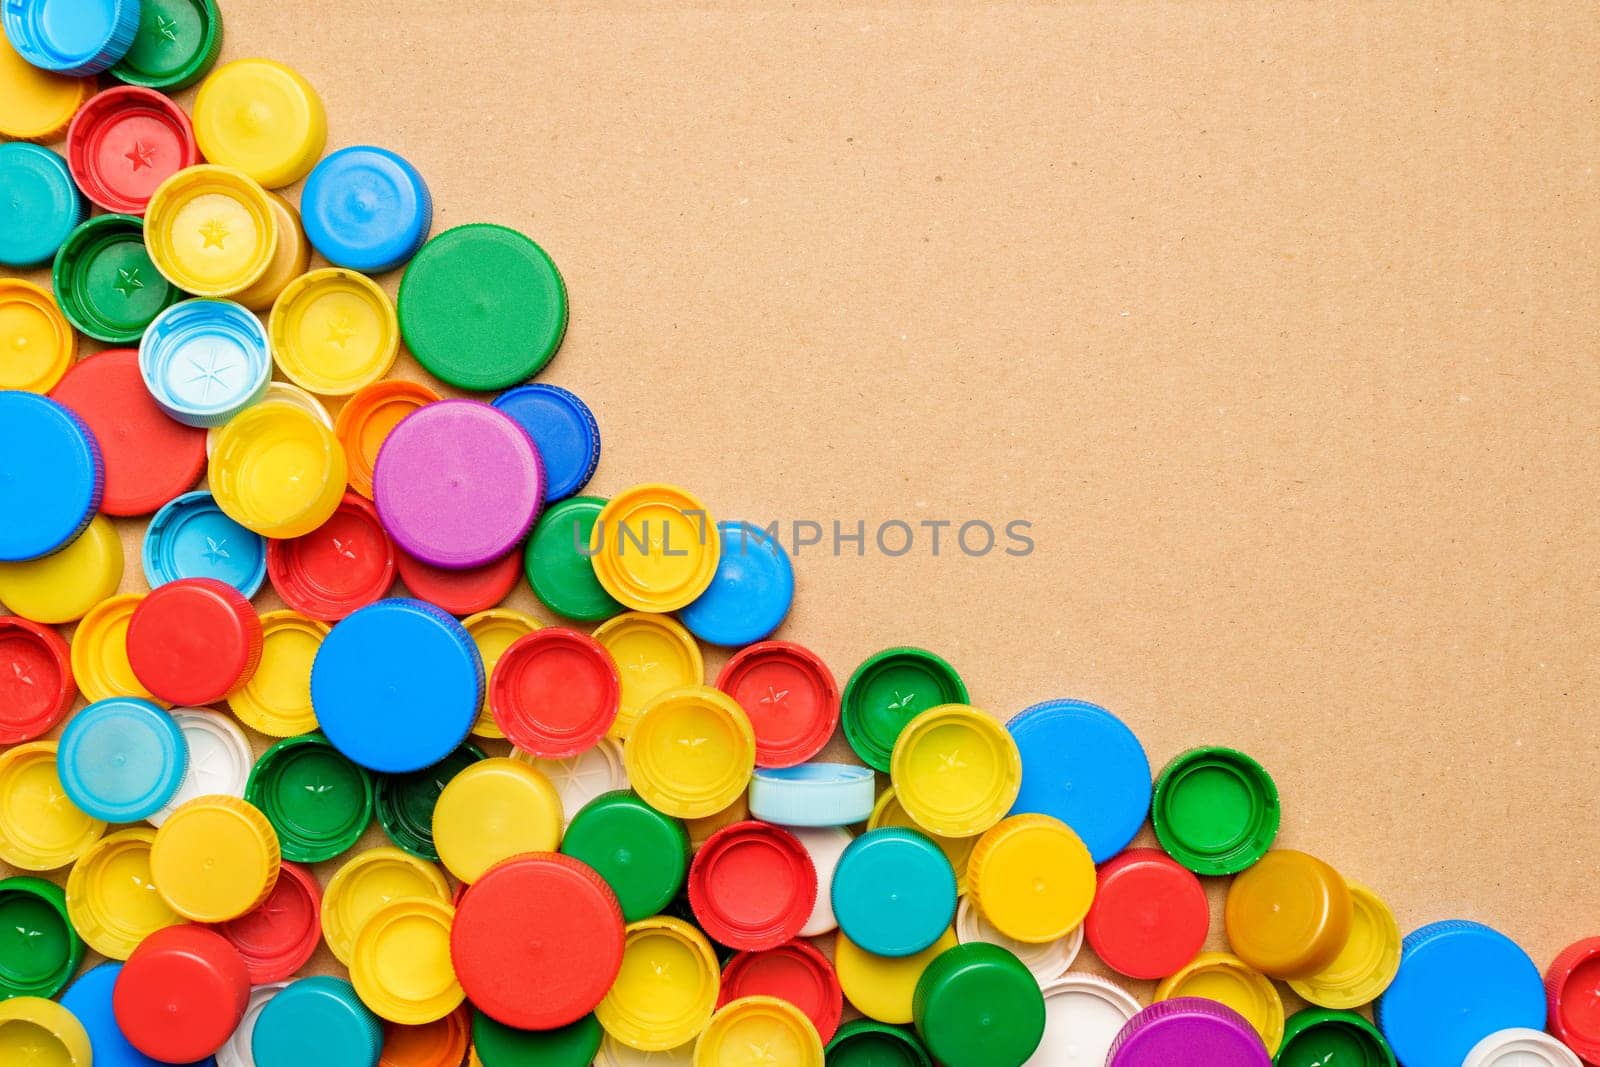 Used PET recycling plastic bottle cap plastic lids. Colorful bottle caps background cardboard box. Garbage PET waste recycling bottle cap sorting waste plastic garbage collection. Recyclable materials